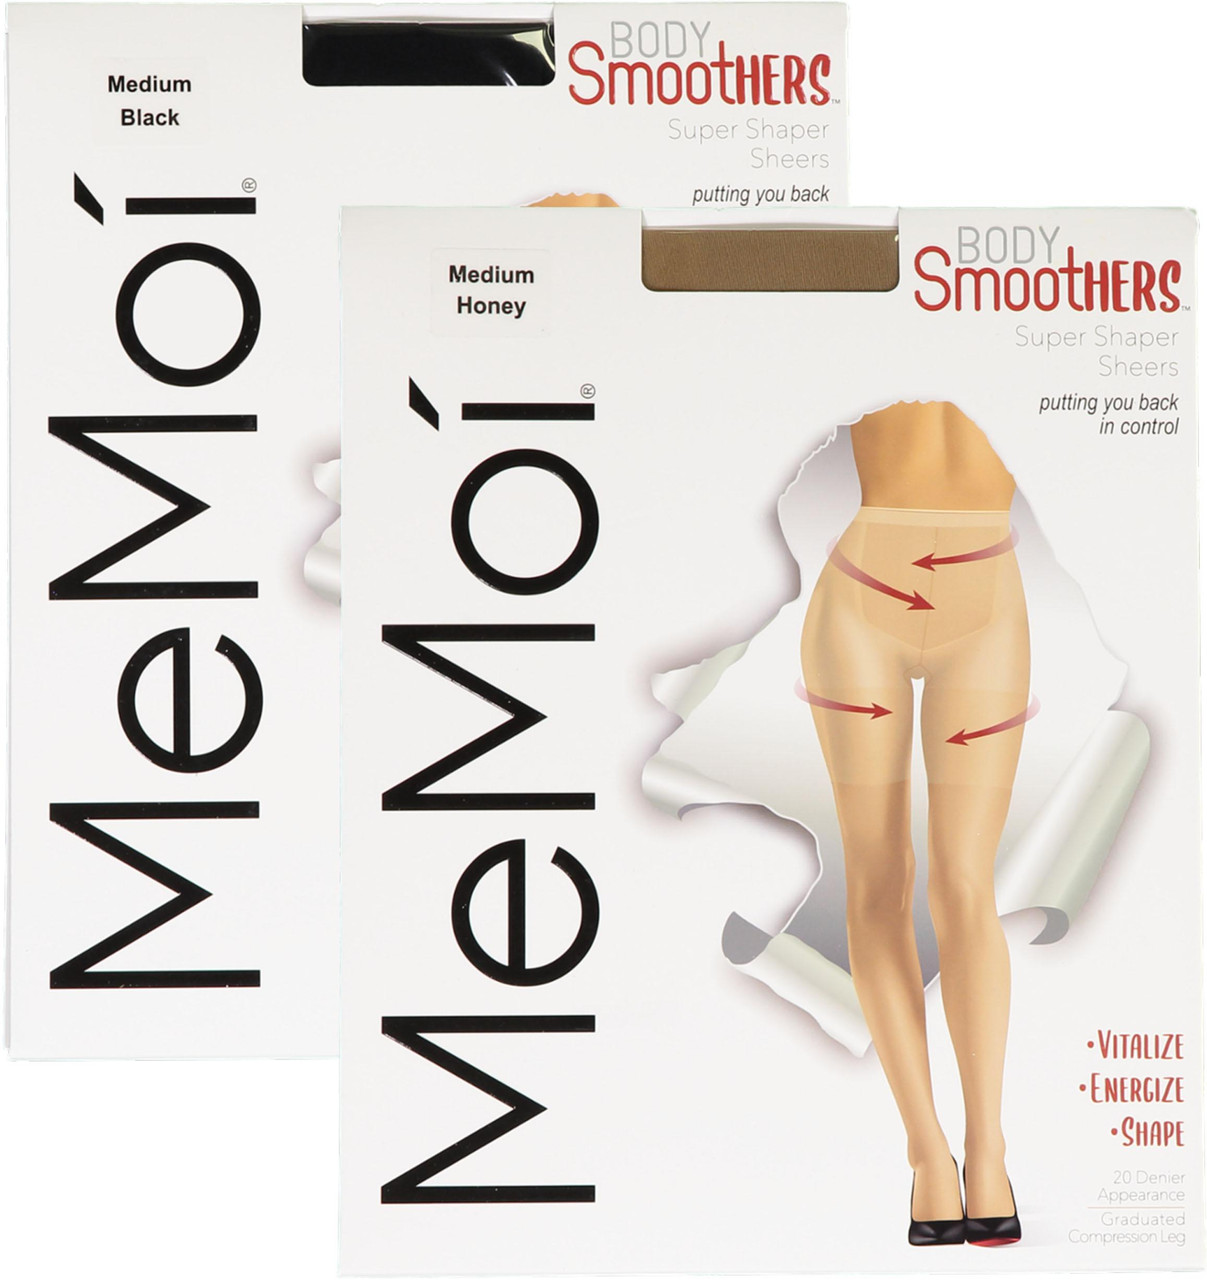 Tummy Control Pantyhose With Light Support Graduate Compression